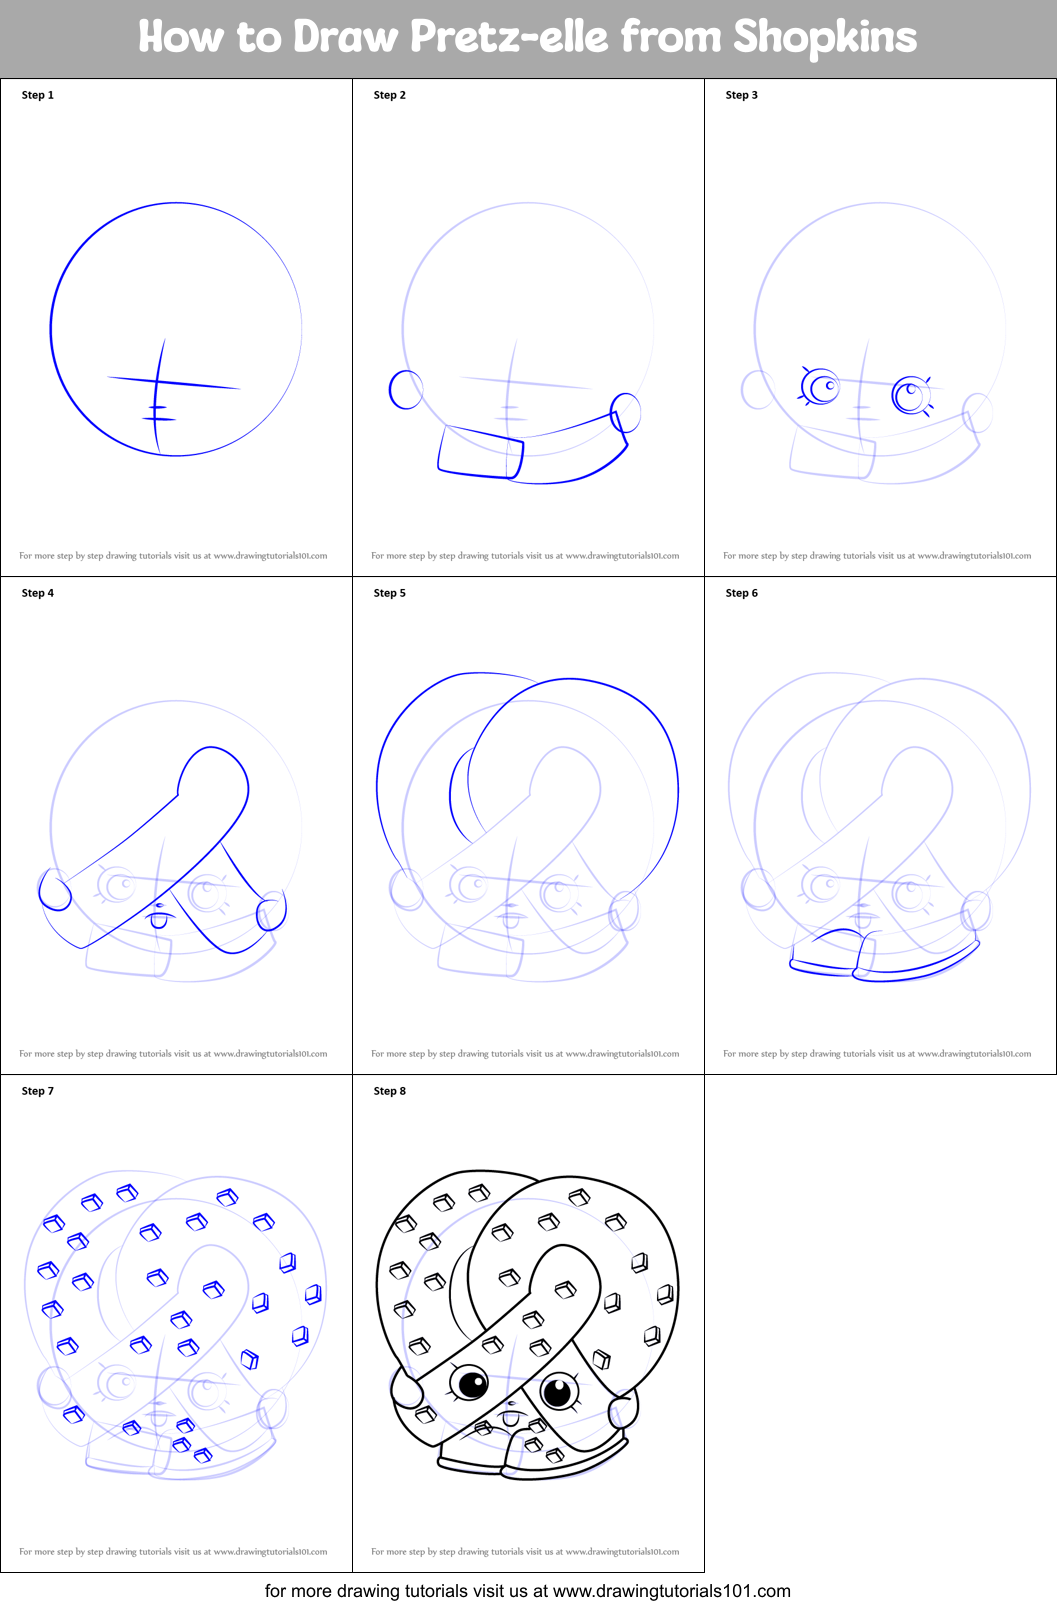 How to Draw Pretz-elle from Shopkins printable step by step drawing